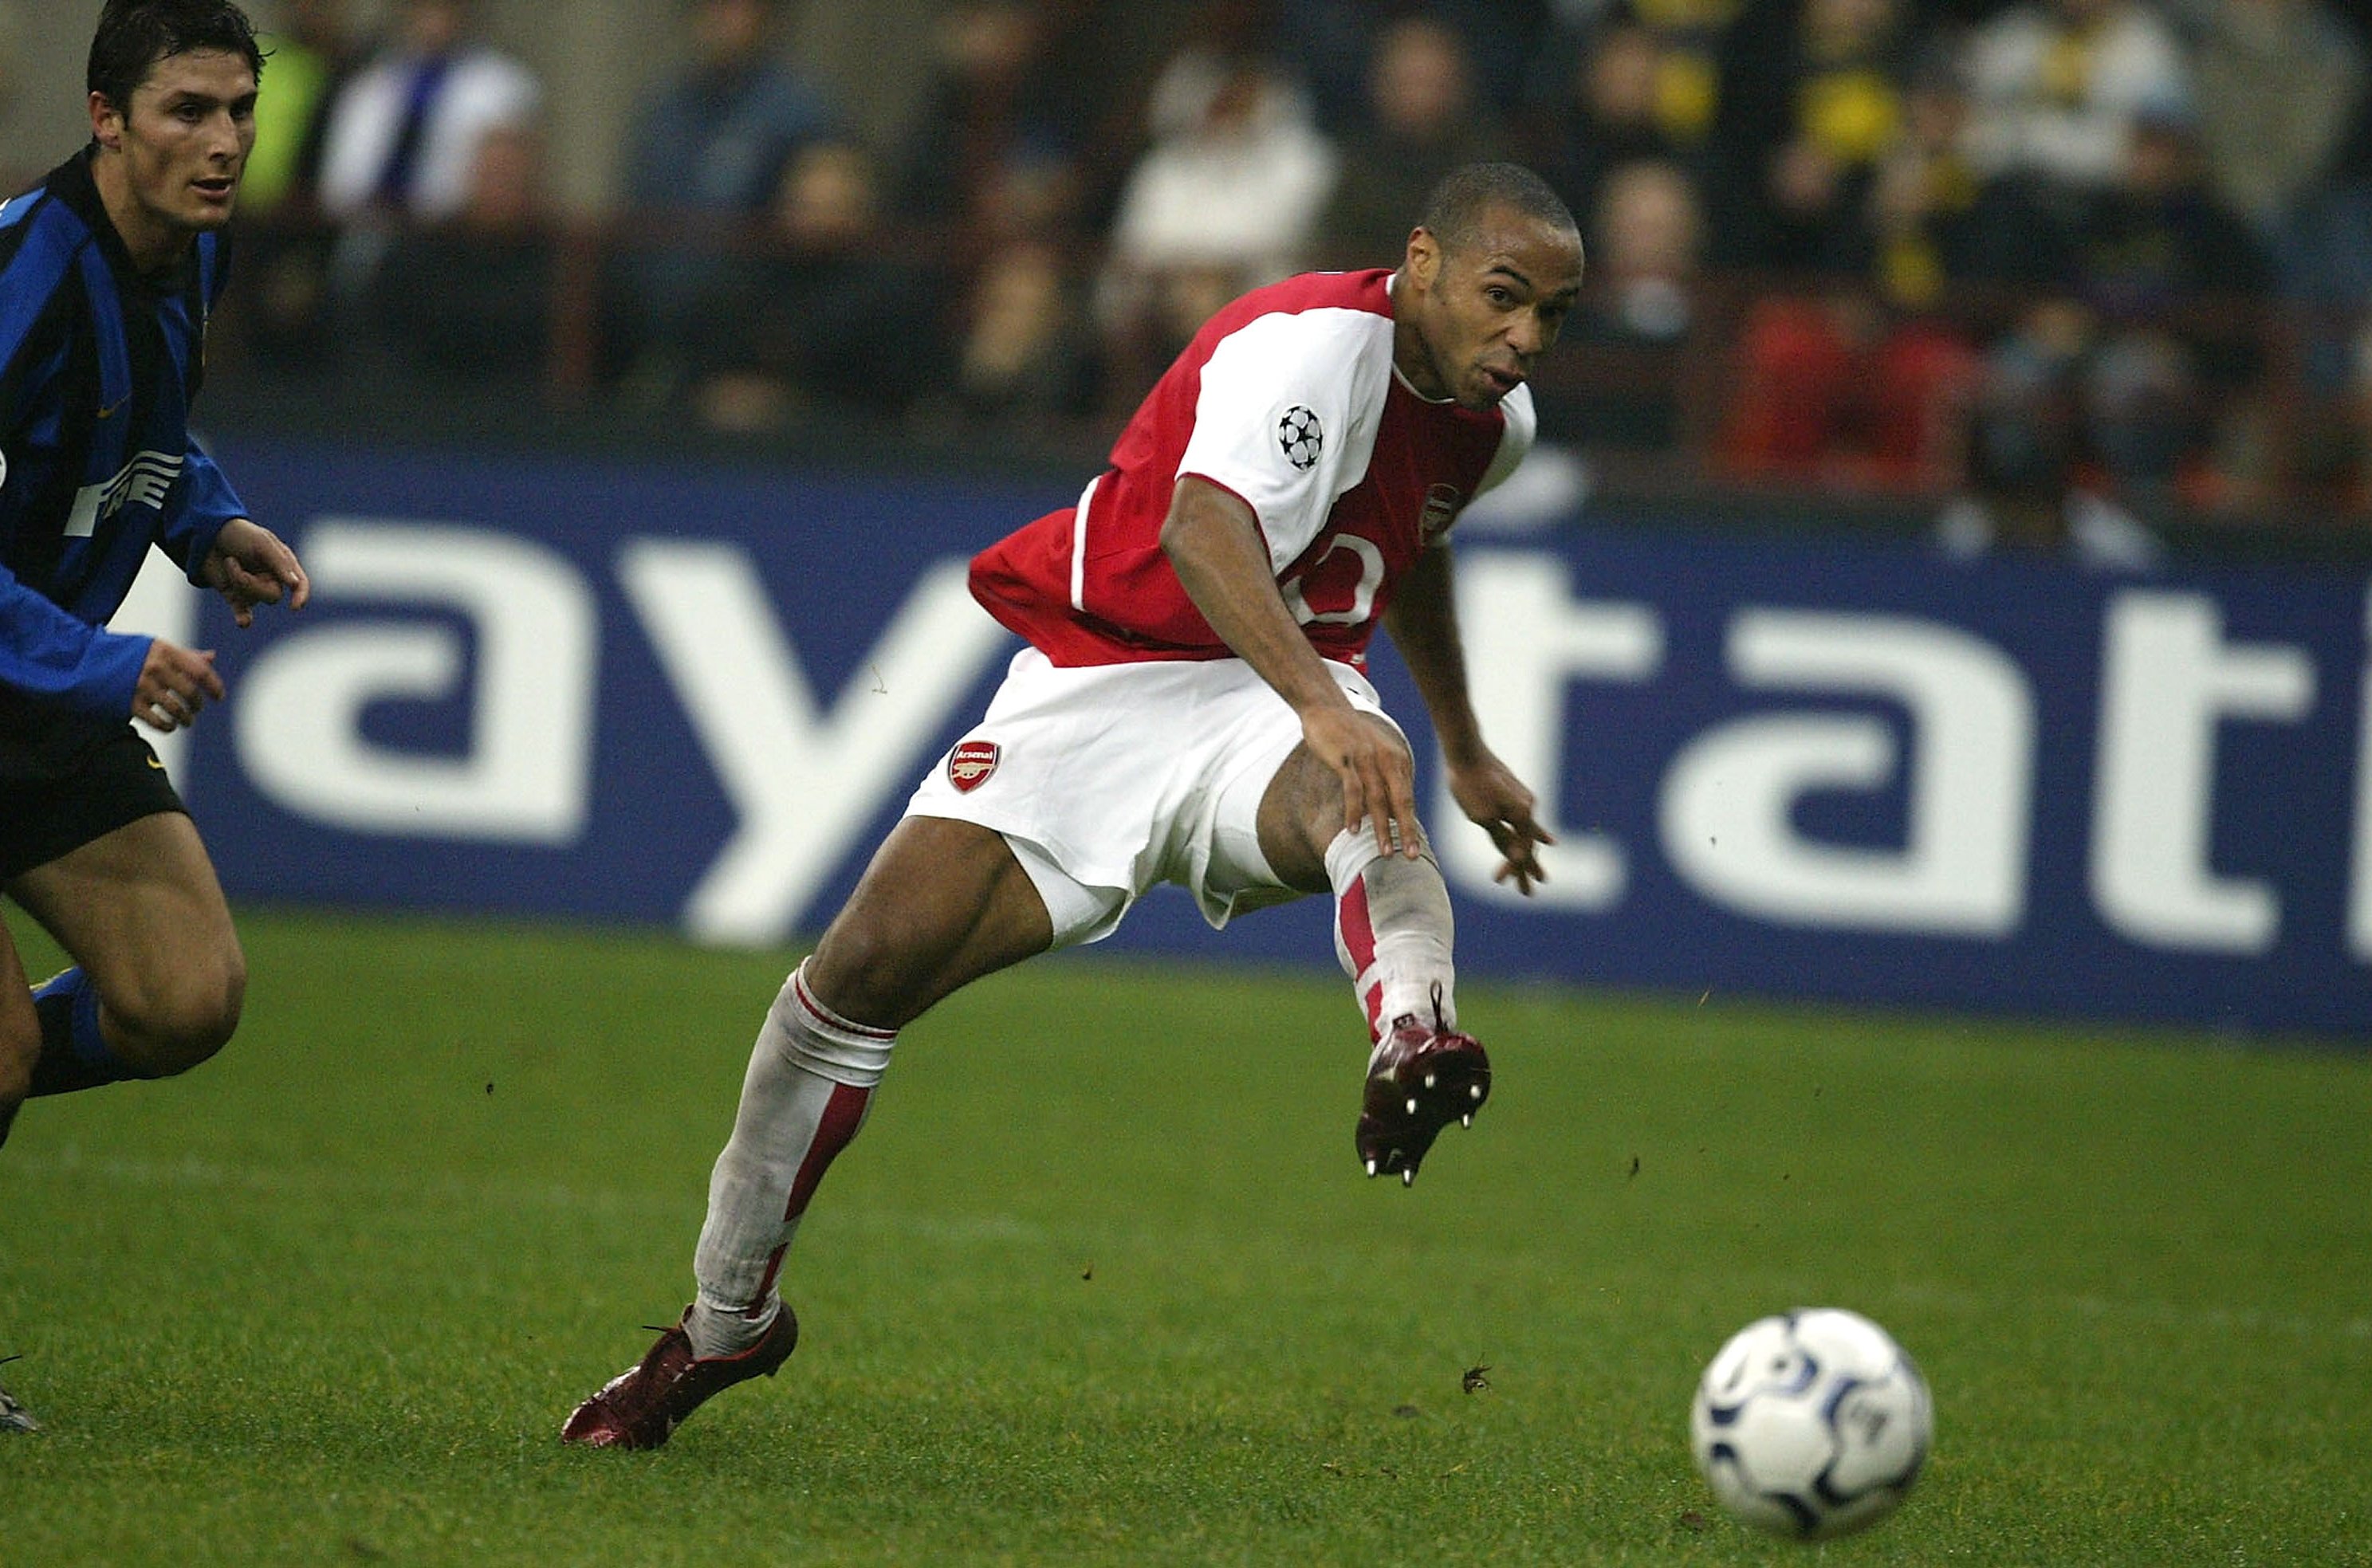 snap up Arsenal legend Thierry Henry as full list of